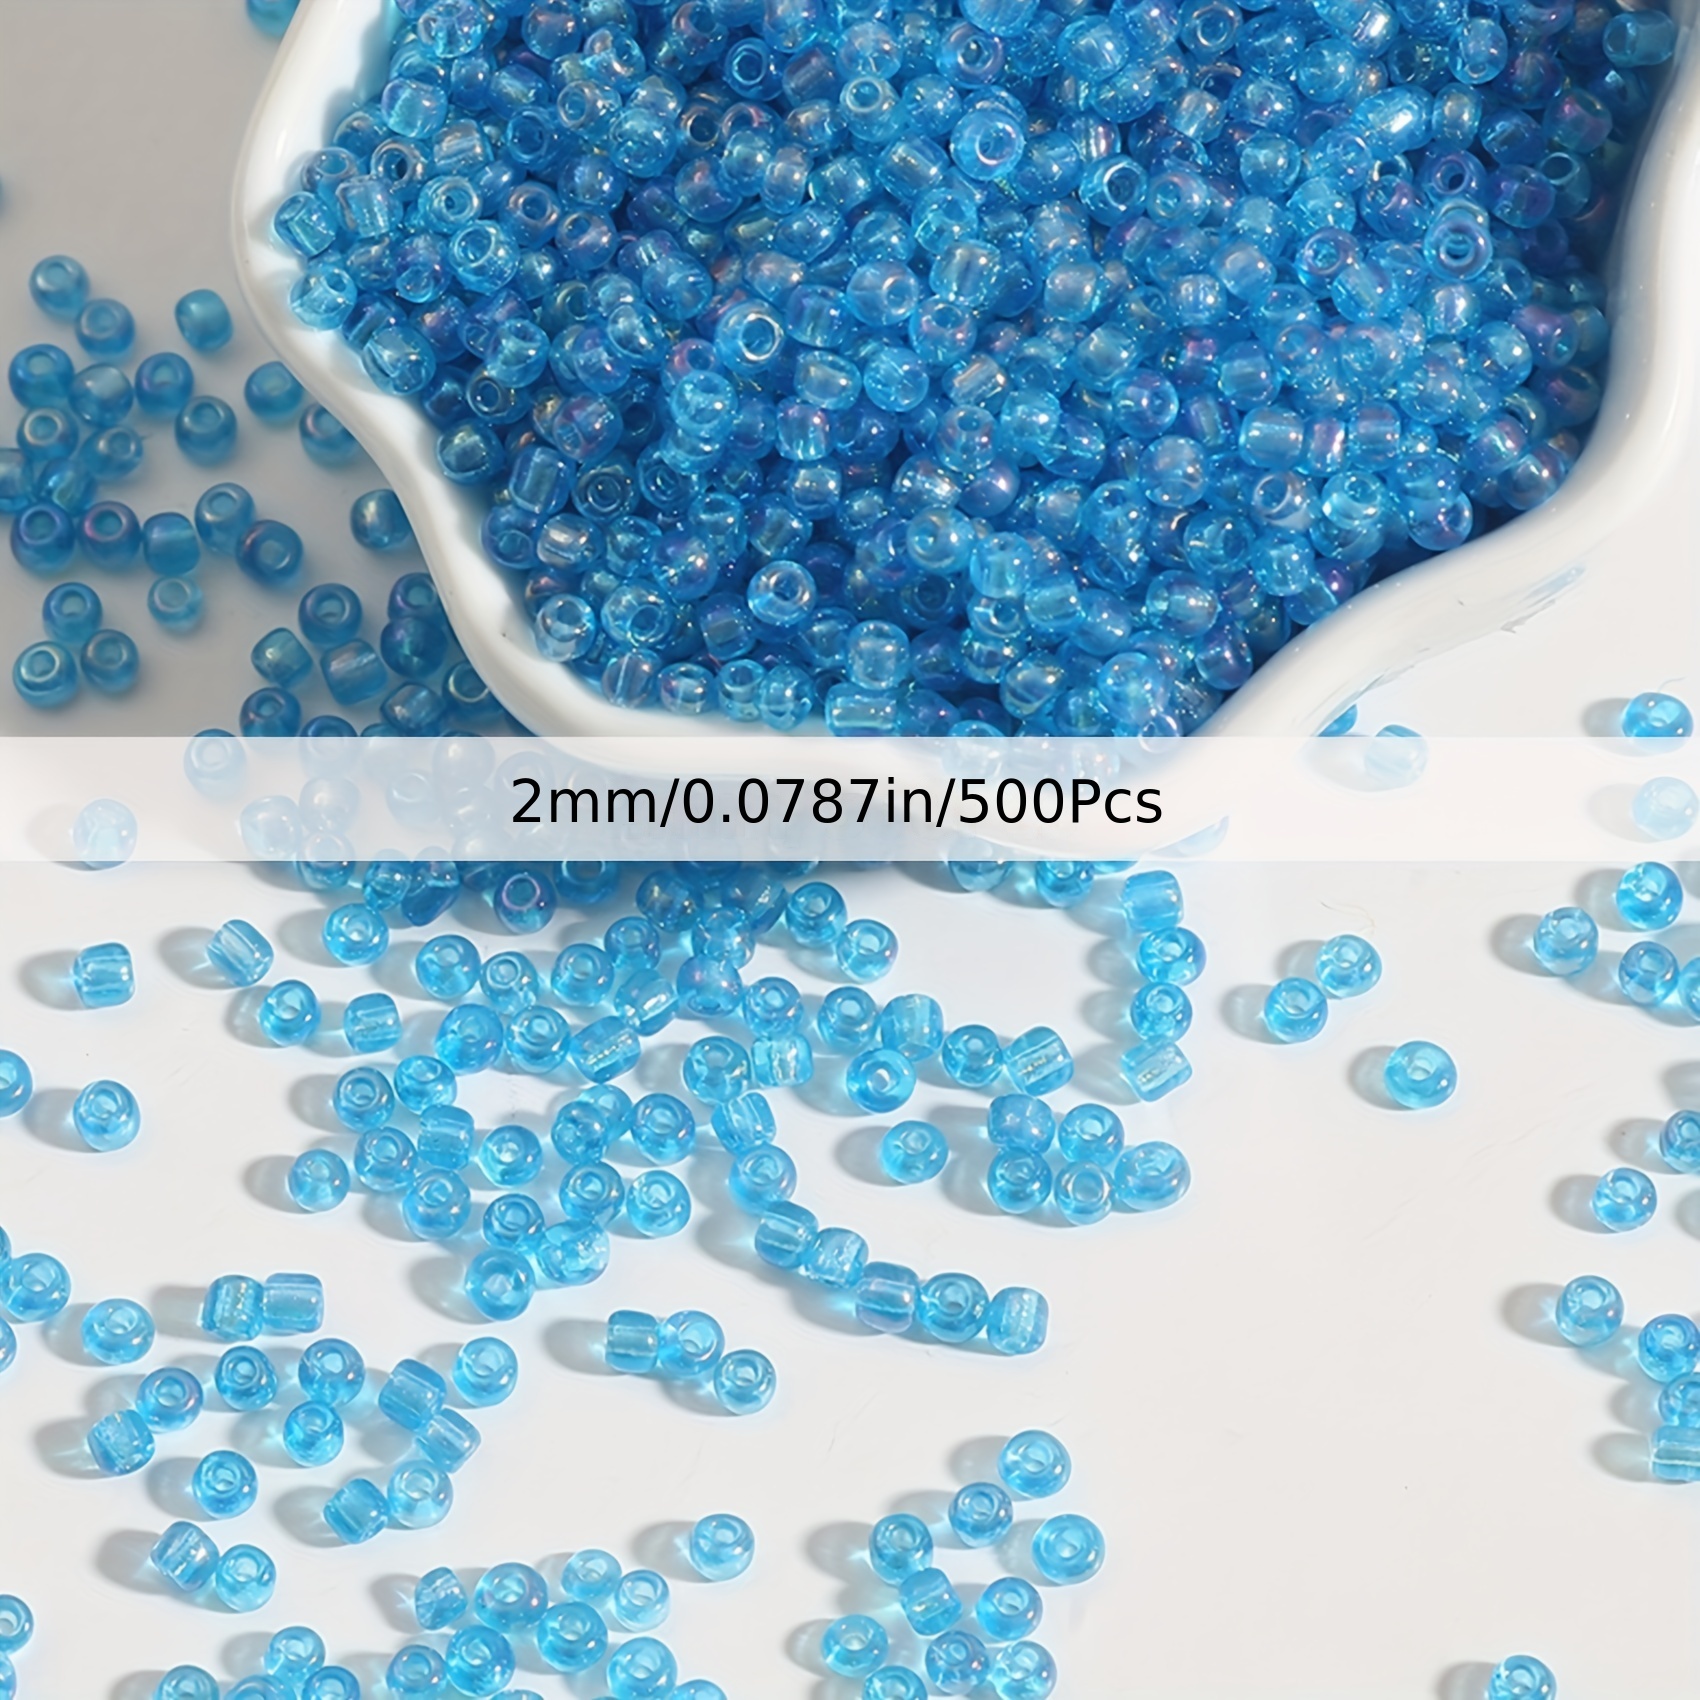 15g 2mm 3mm 4mm Glass beads Wear Resistant Opaque Round Spacer Beads For DIY